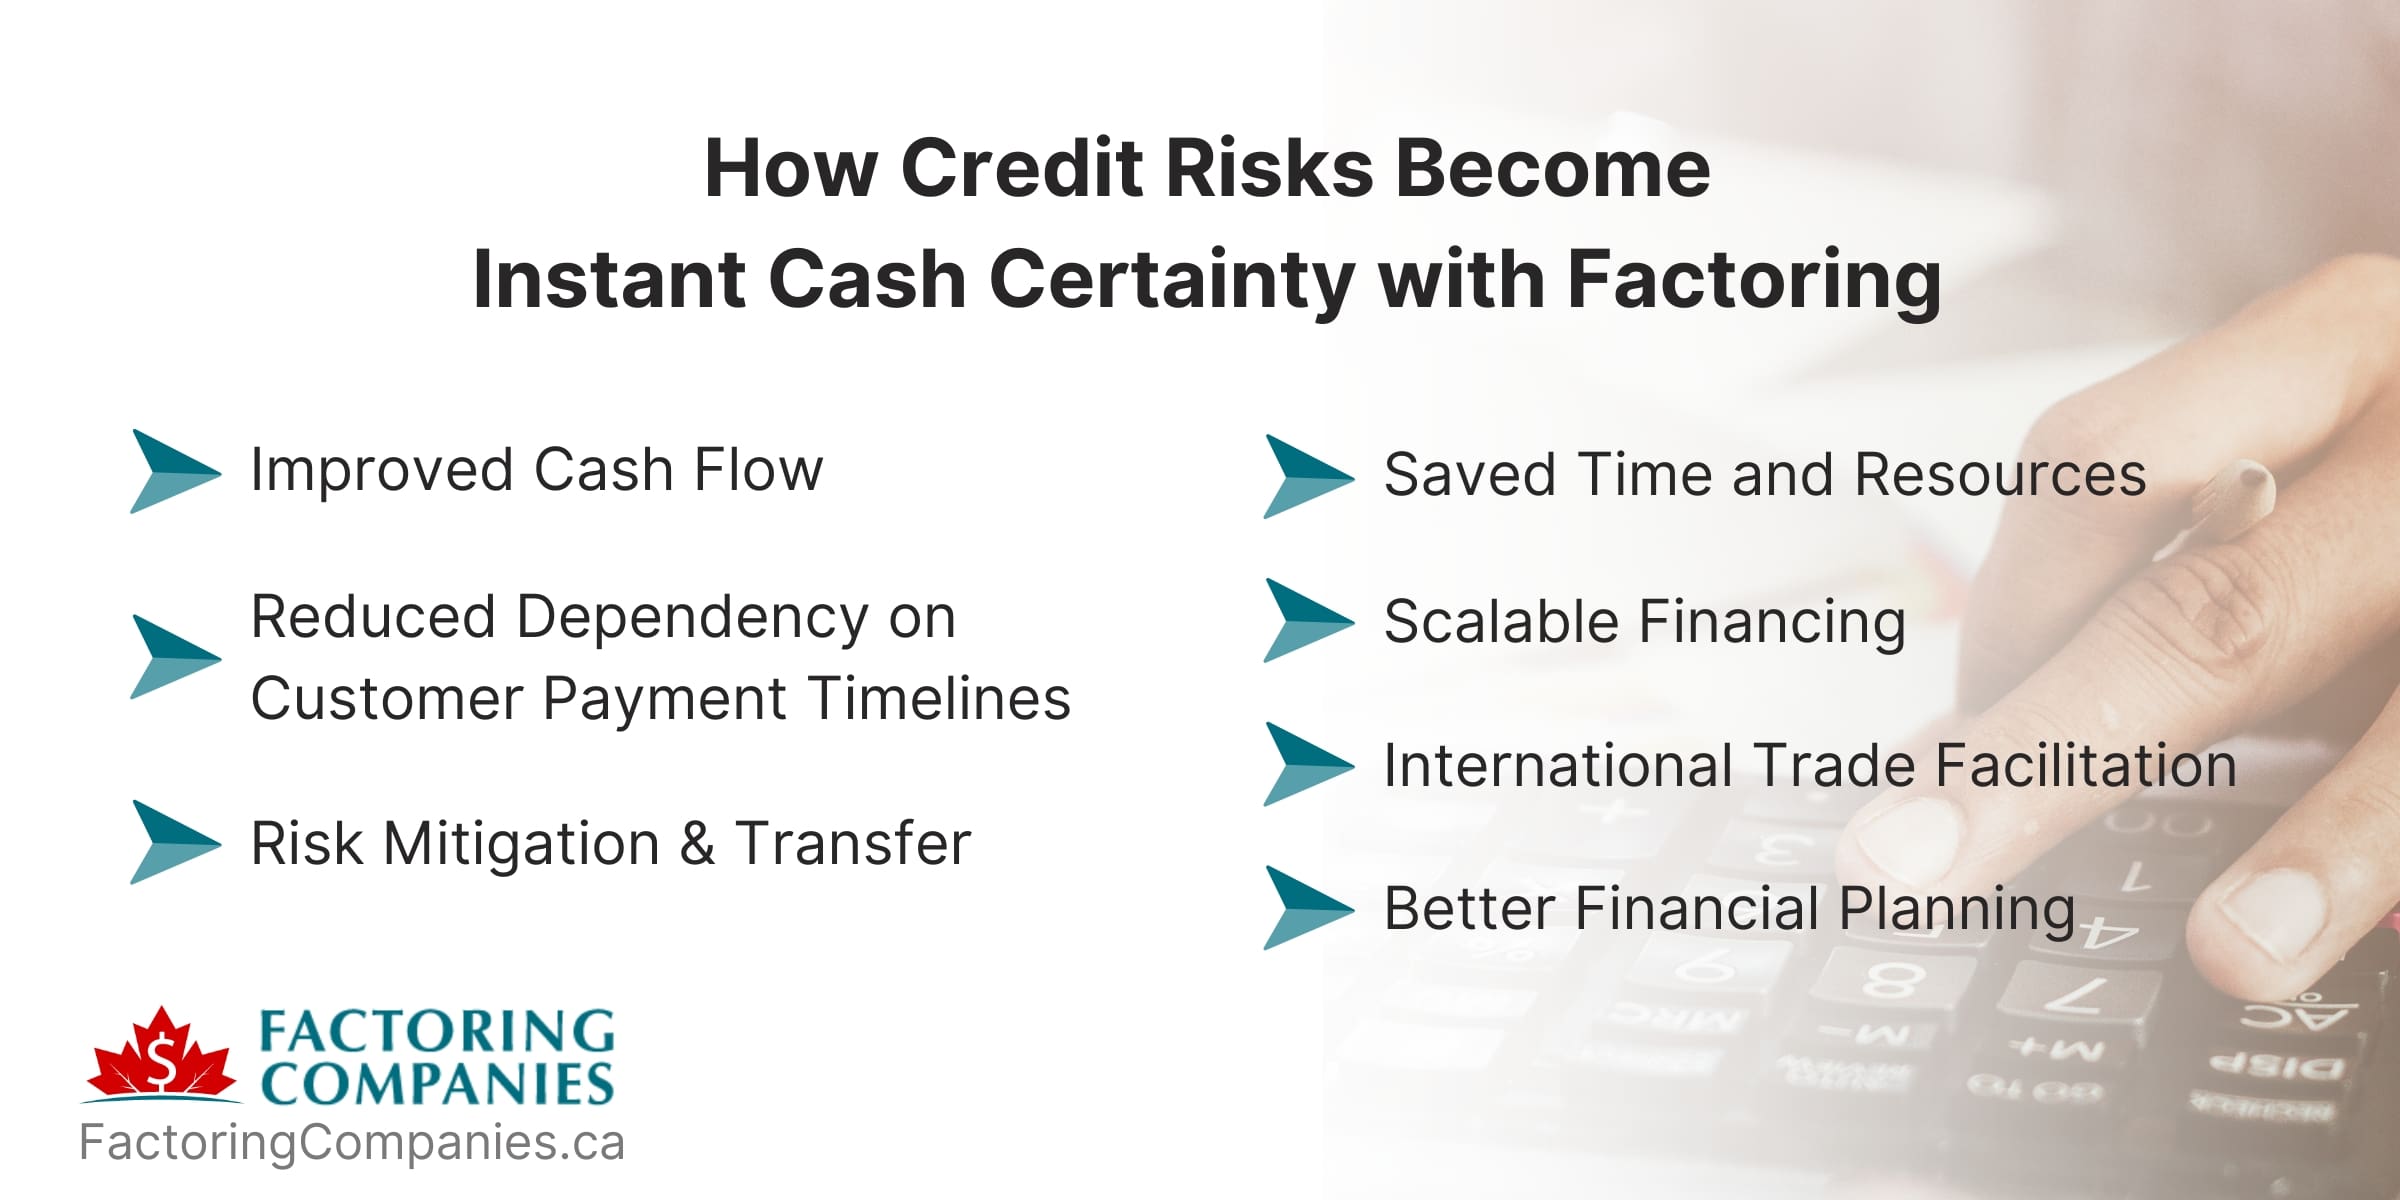 How Credit Risks Become Instant Cash Certainty with Factoring